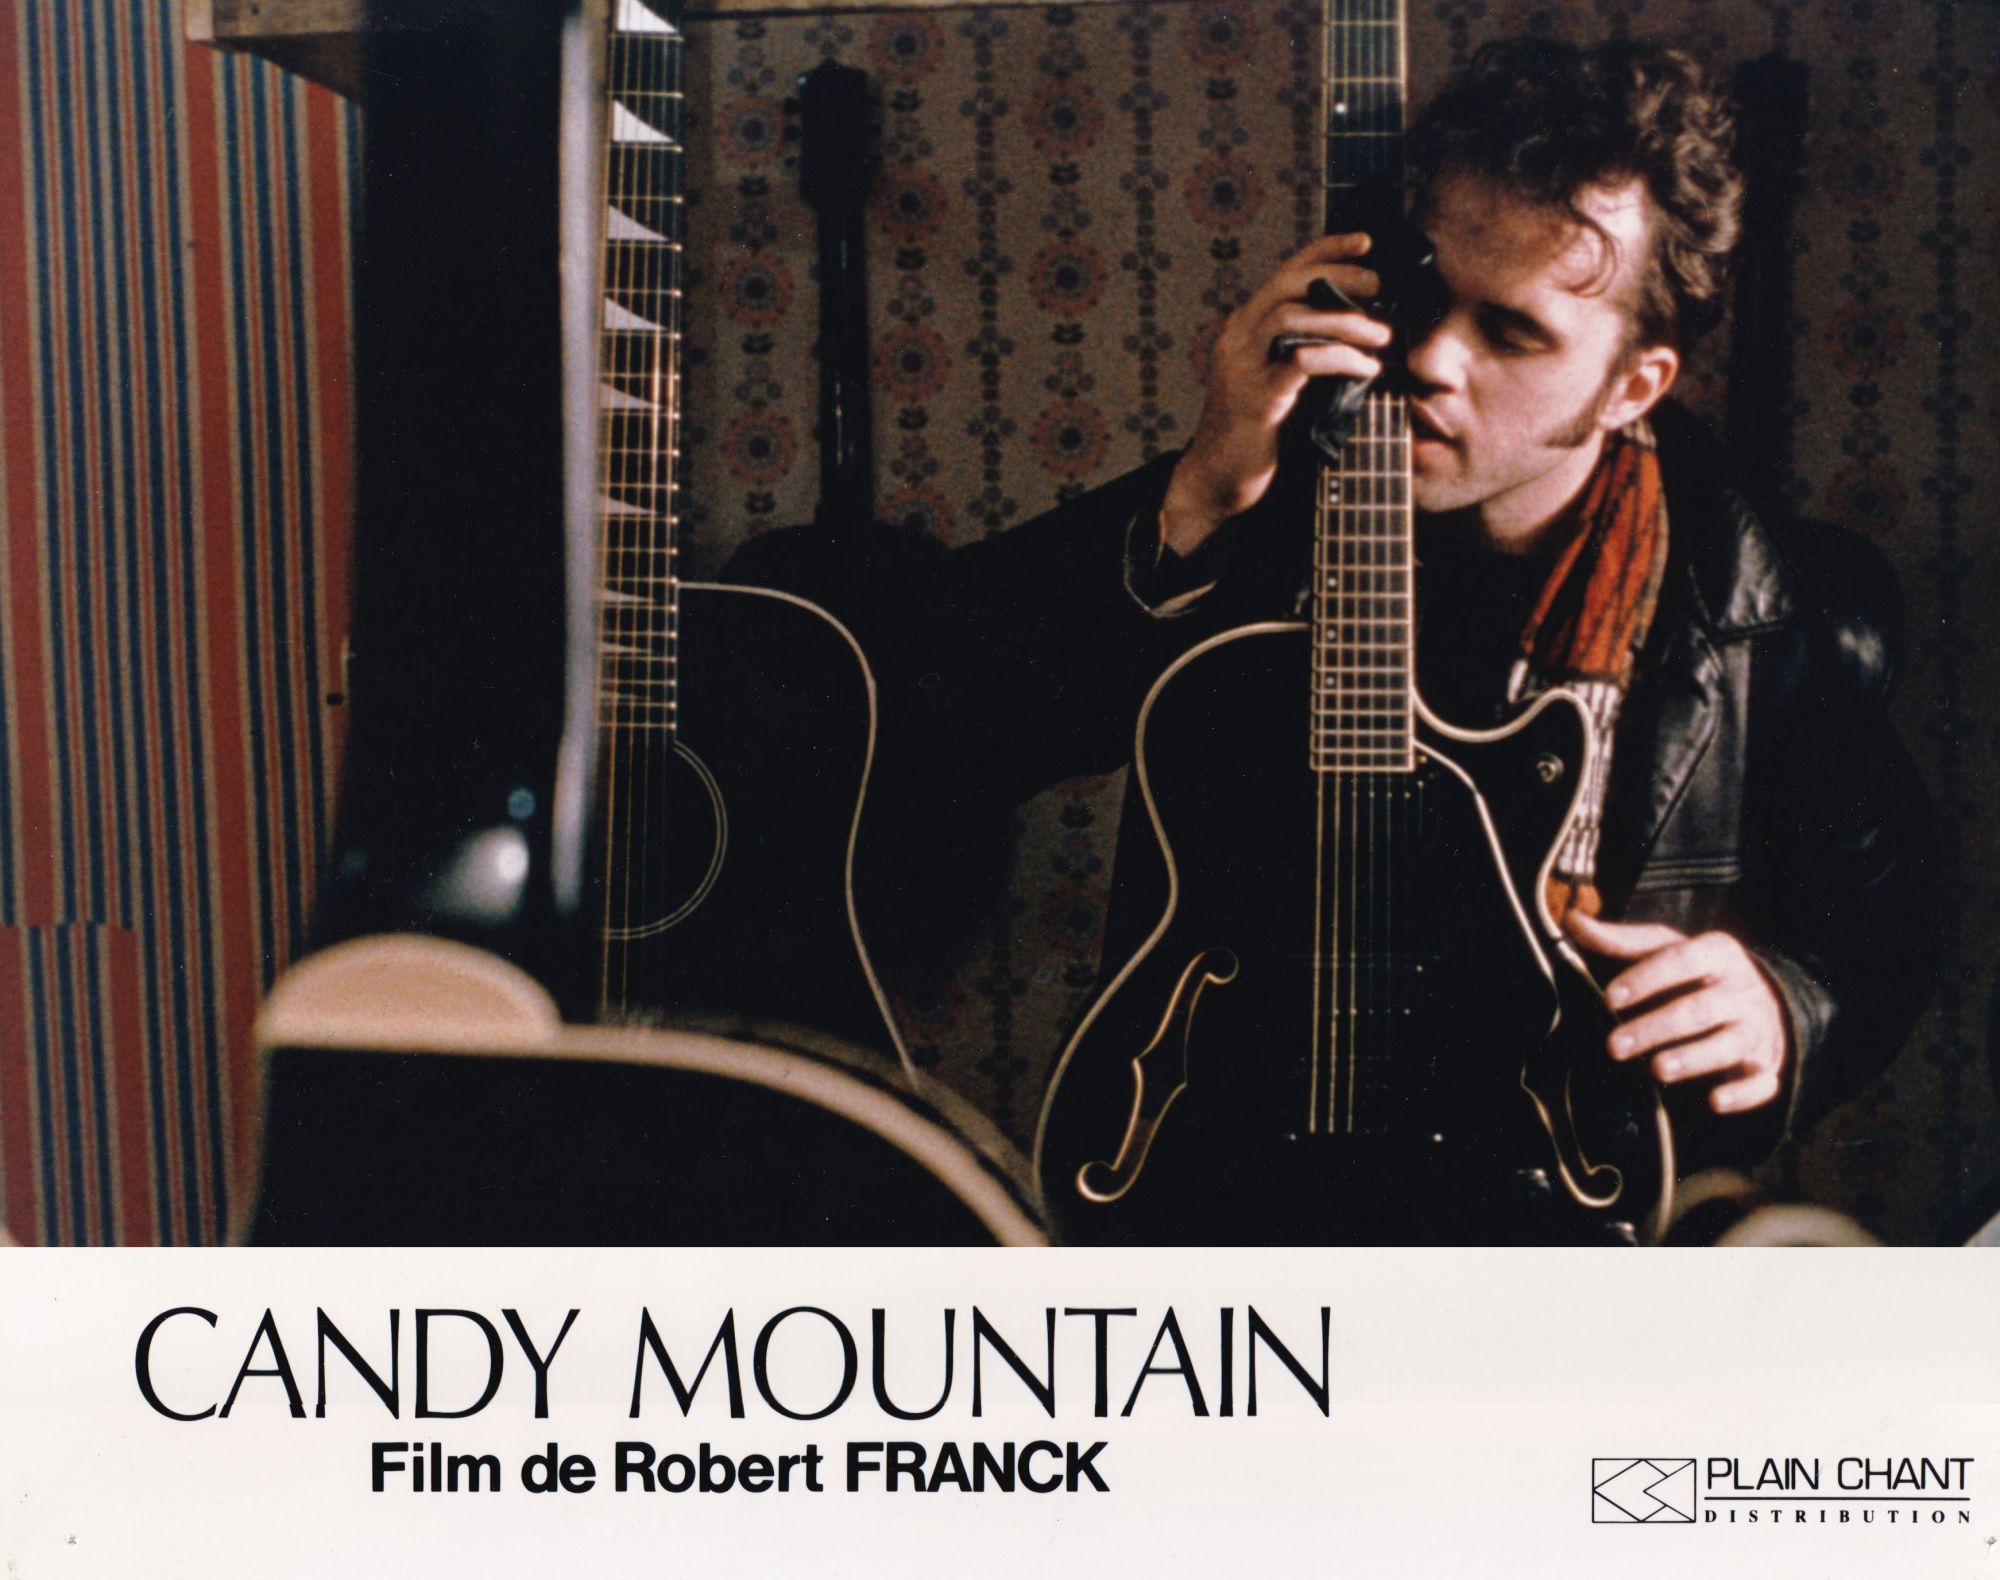 Candy Mountain by Robert Frank